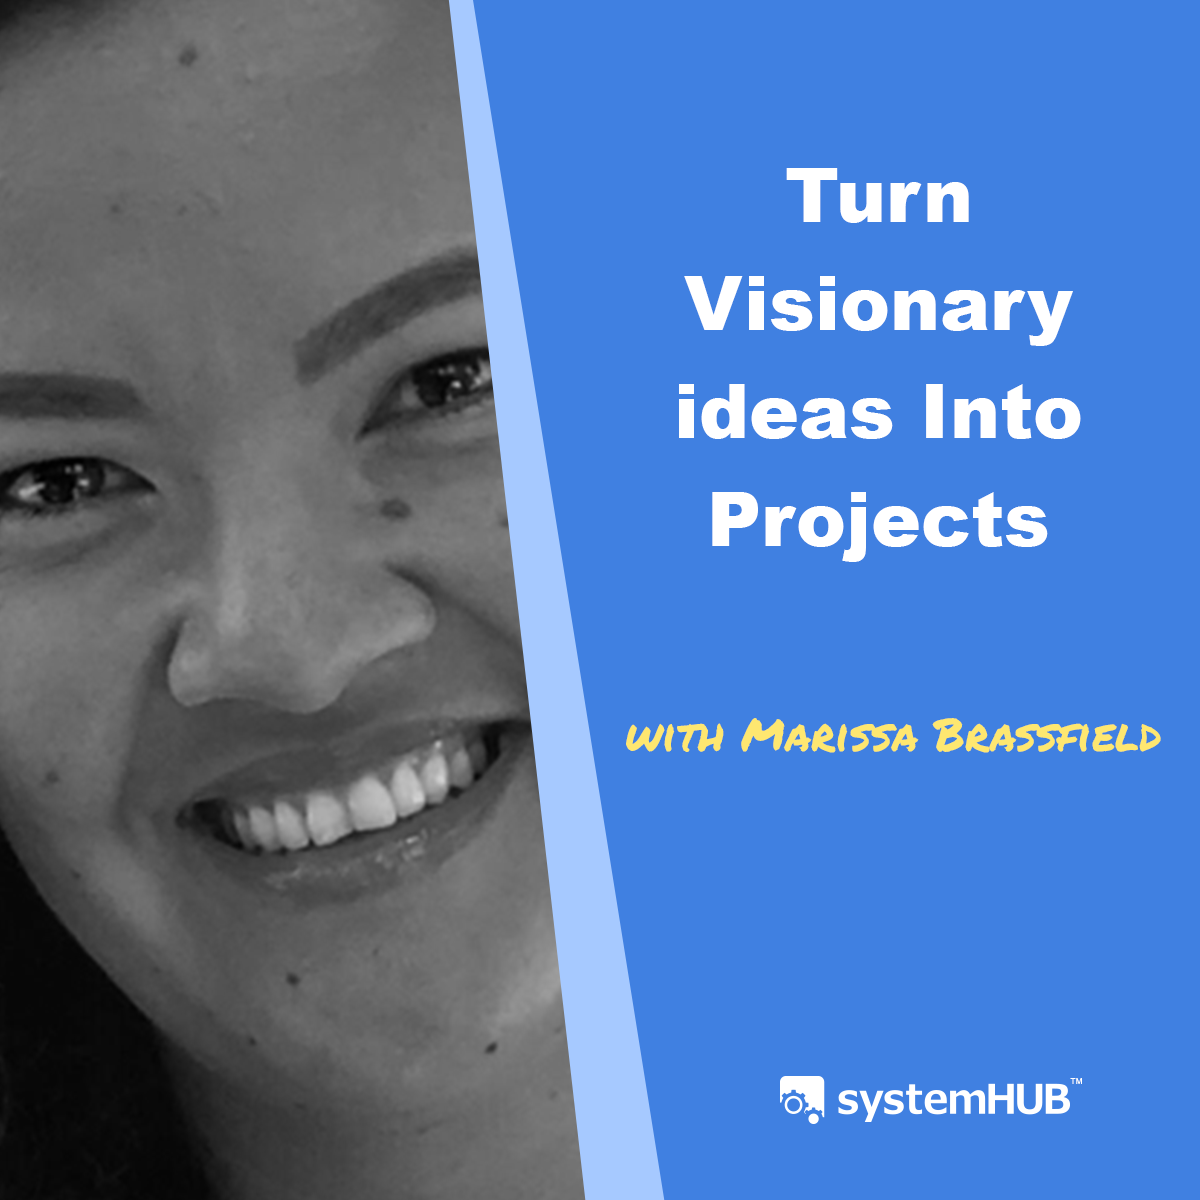 The System to Turn Visionary Ideas Into Projects, Experiences & Businesses with Marissa Brassfield